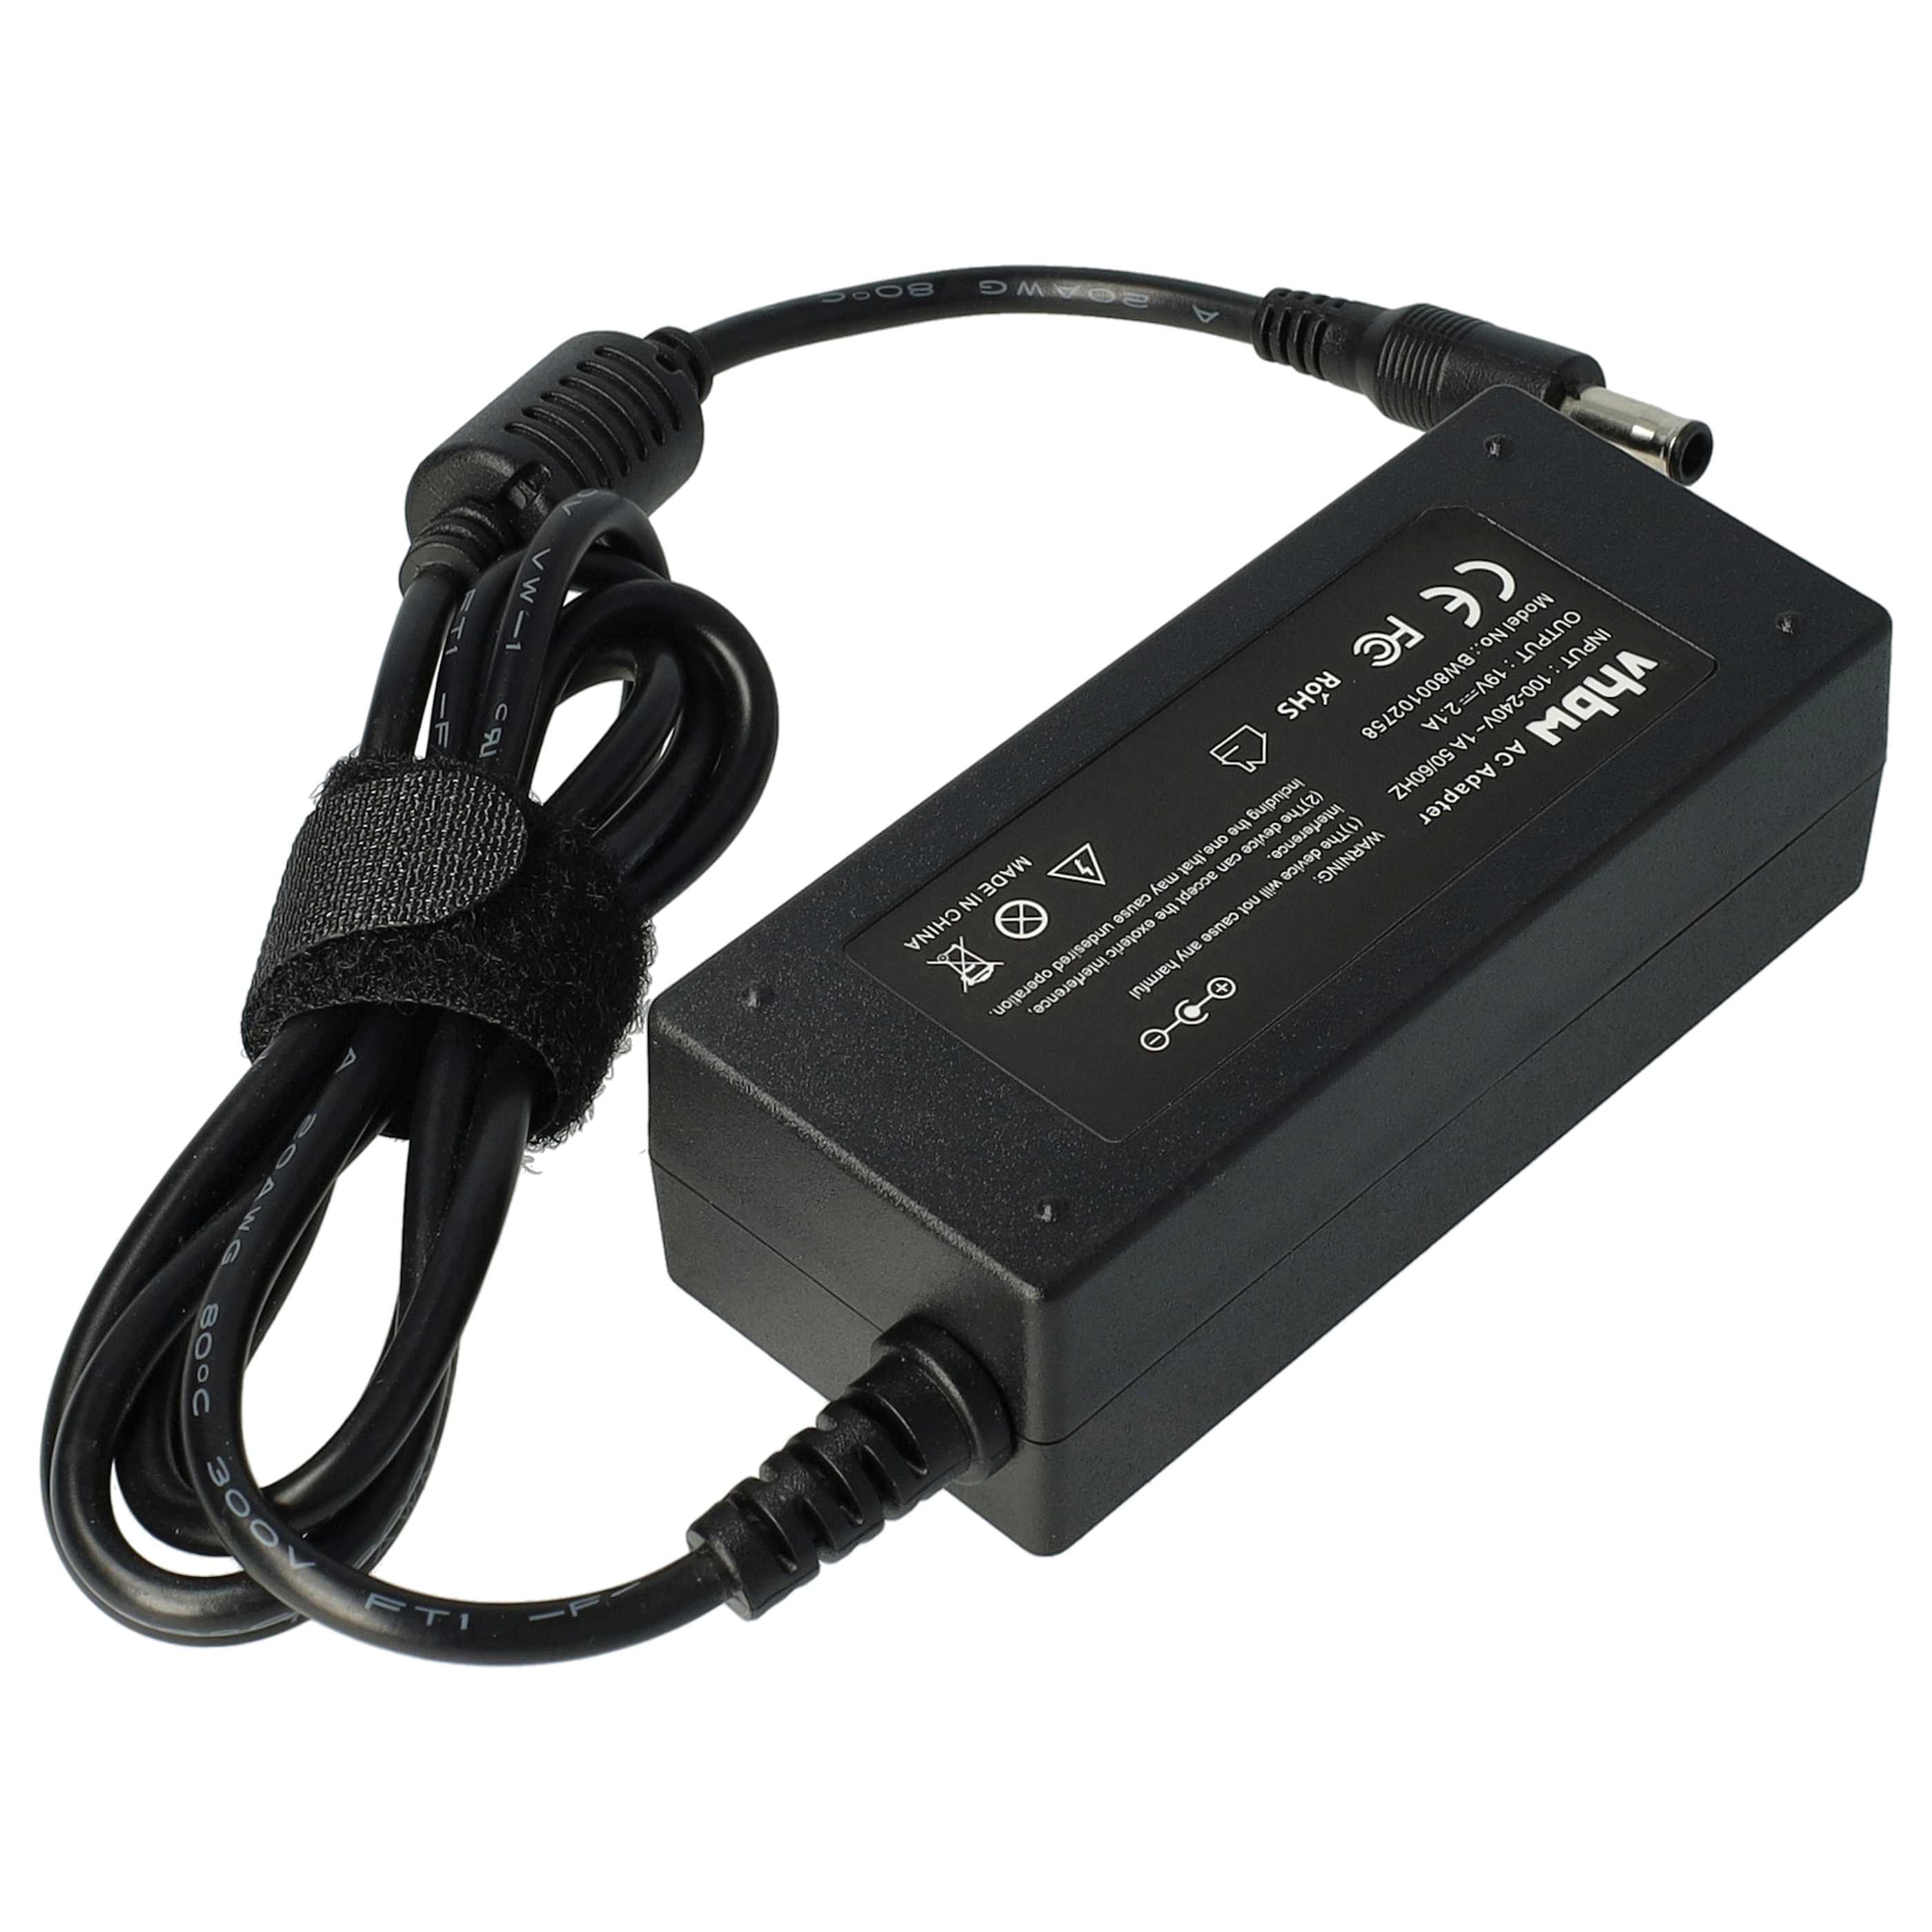 Mains Power Adapter replaces AD-6019 for SamsungNotebook, 40 W